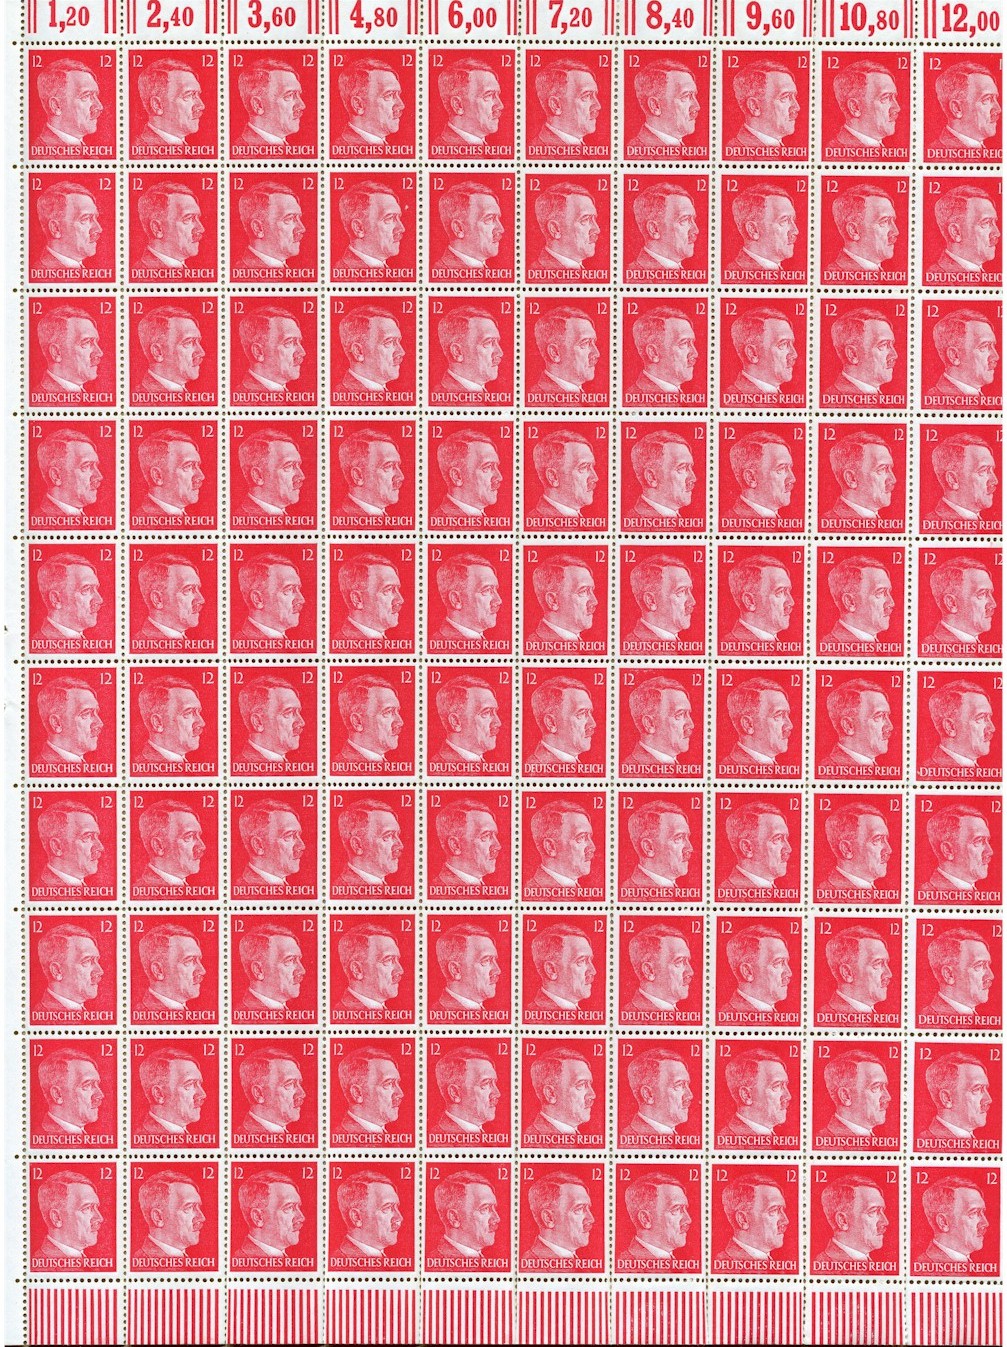 FULL AND COMPLETE GERMAN WWII HITLER HEAD STAMP SHEET OF 100 STAMPS 12 RPF VALUE. FULL GUM